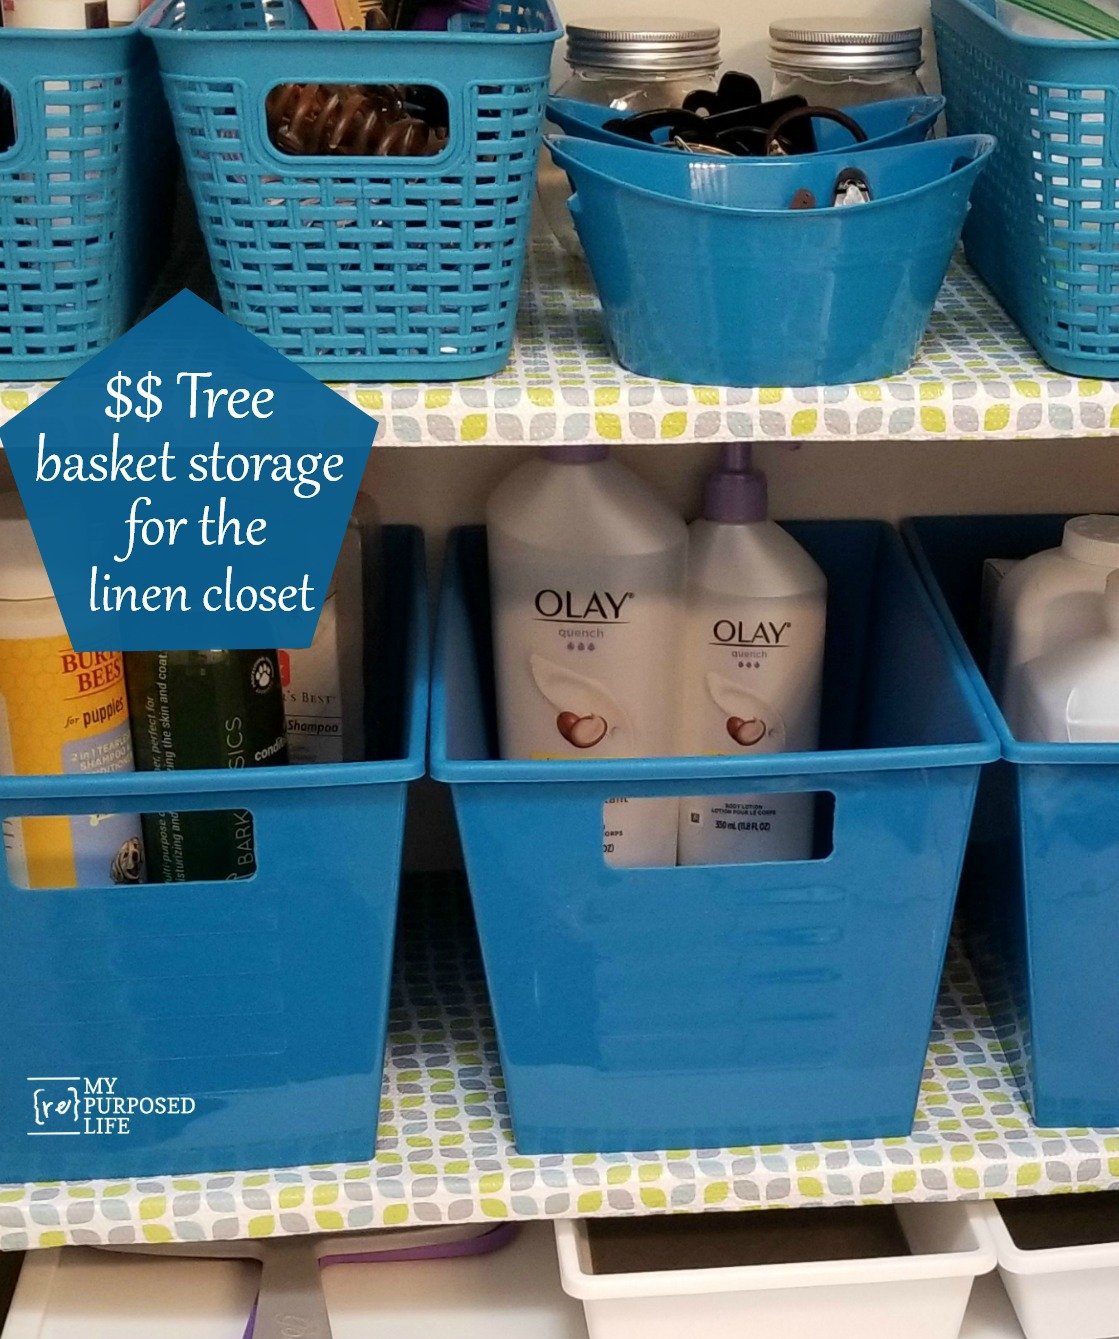 2016 Organizing Tips  From Closet To Office Storage Using Dollar Tree  Goodies 